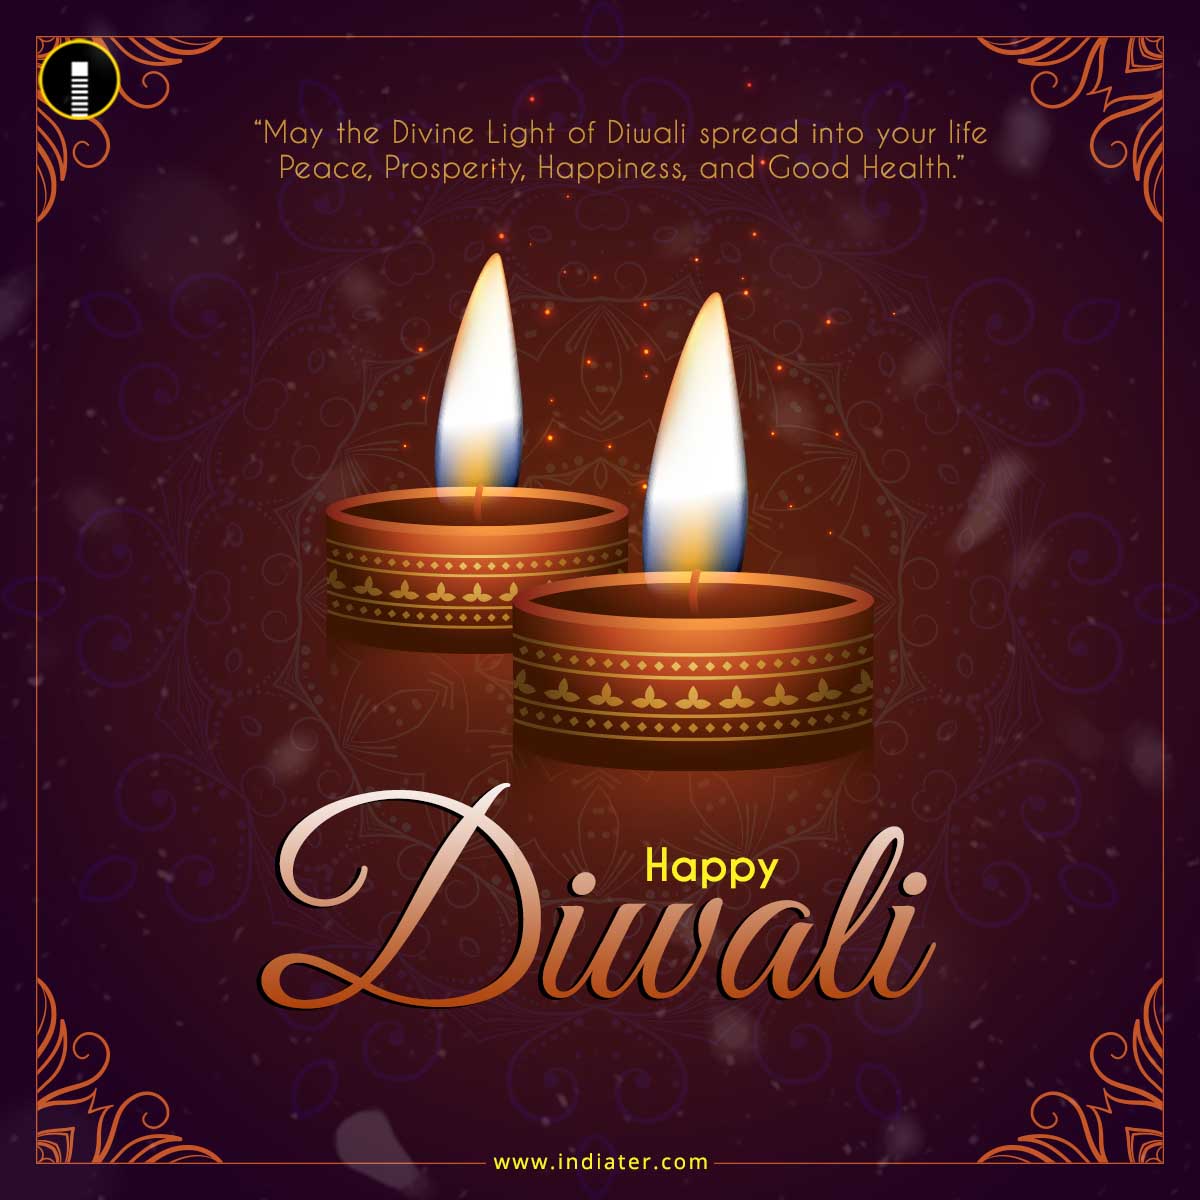 happy diwali wishes greetings free download with quotes - Indiater